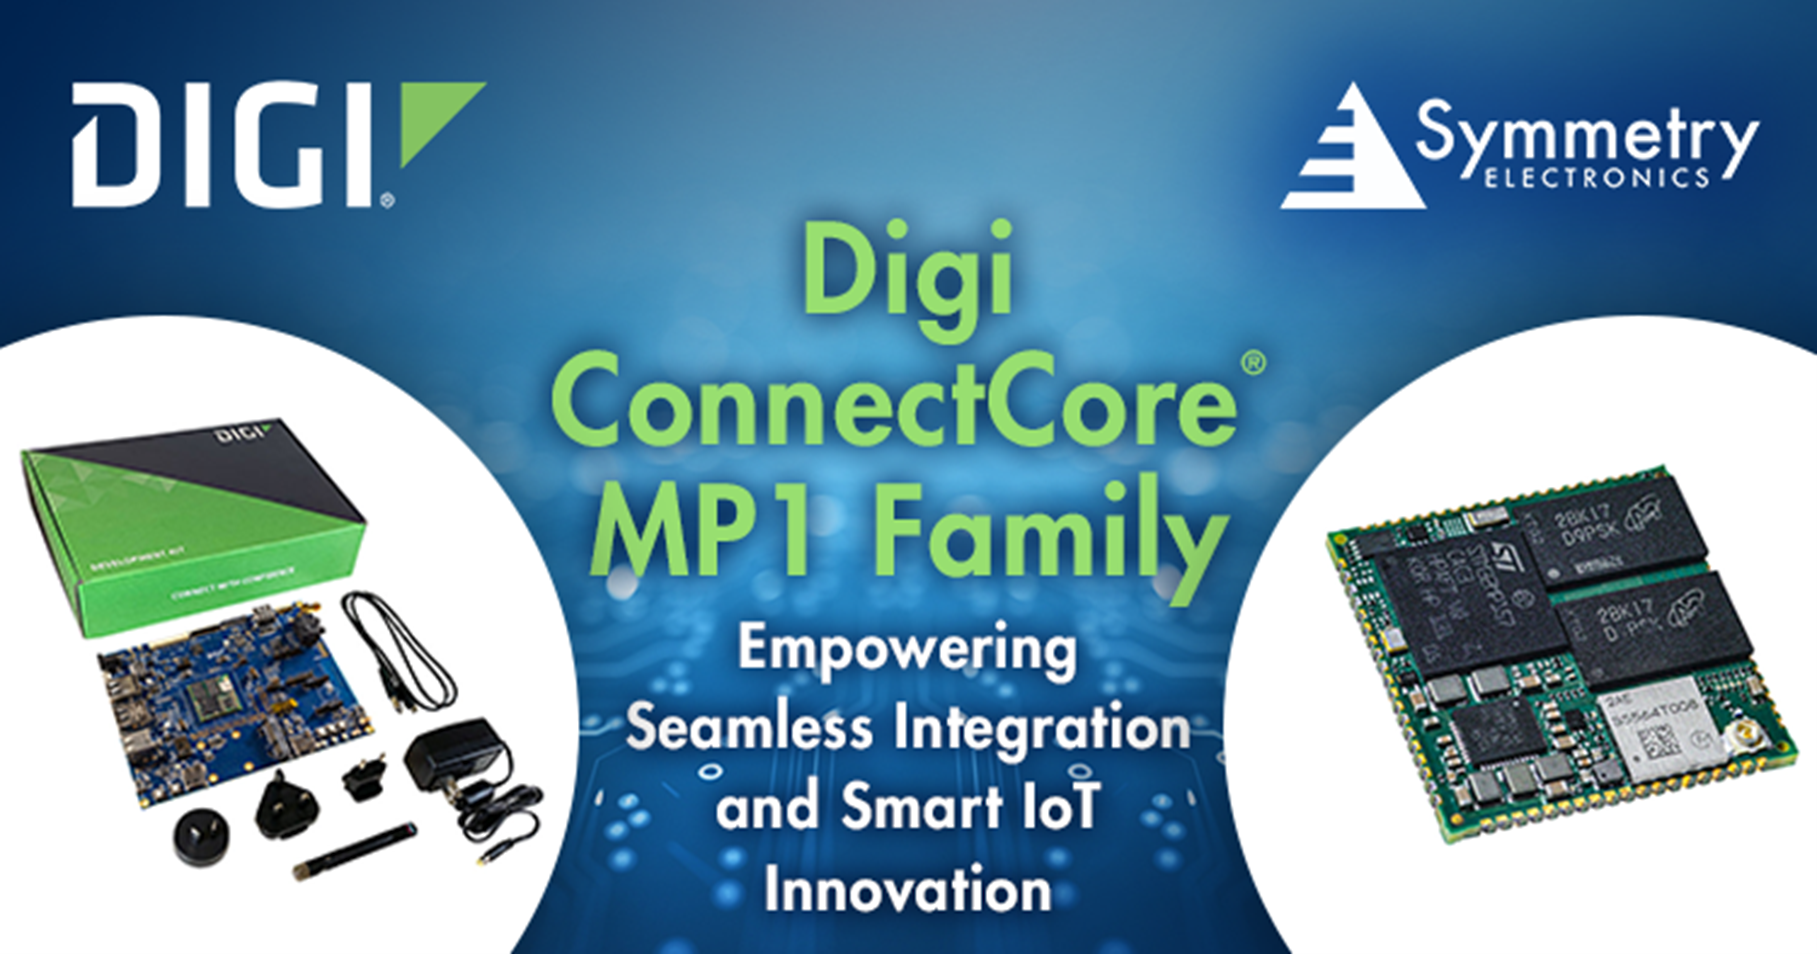 The-ConnectCore-MP1-Family-From-Digi-International-Is-Available-At-Symmetry-Electronics